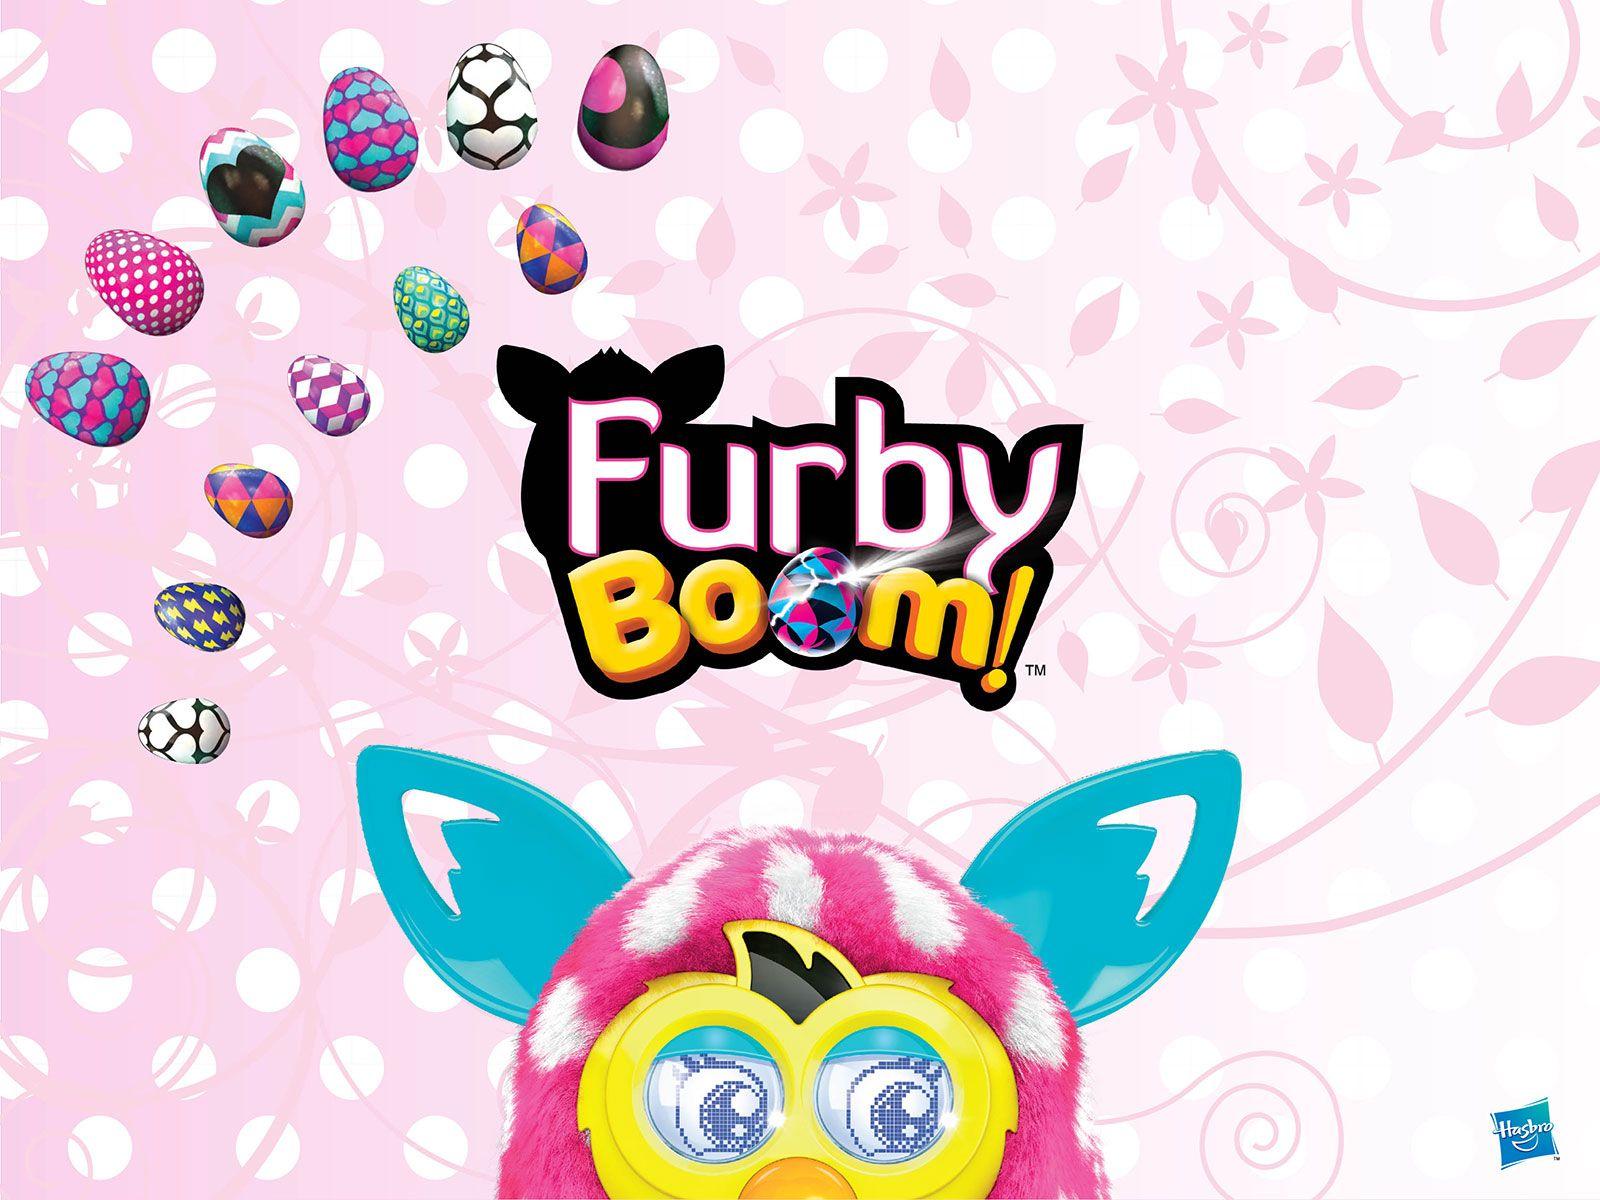 Furby Boom new generation is hatching